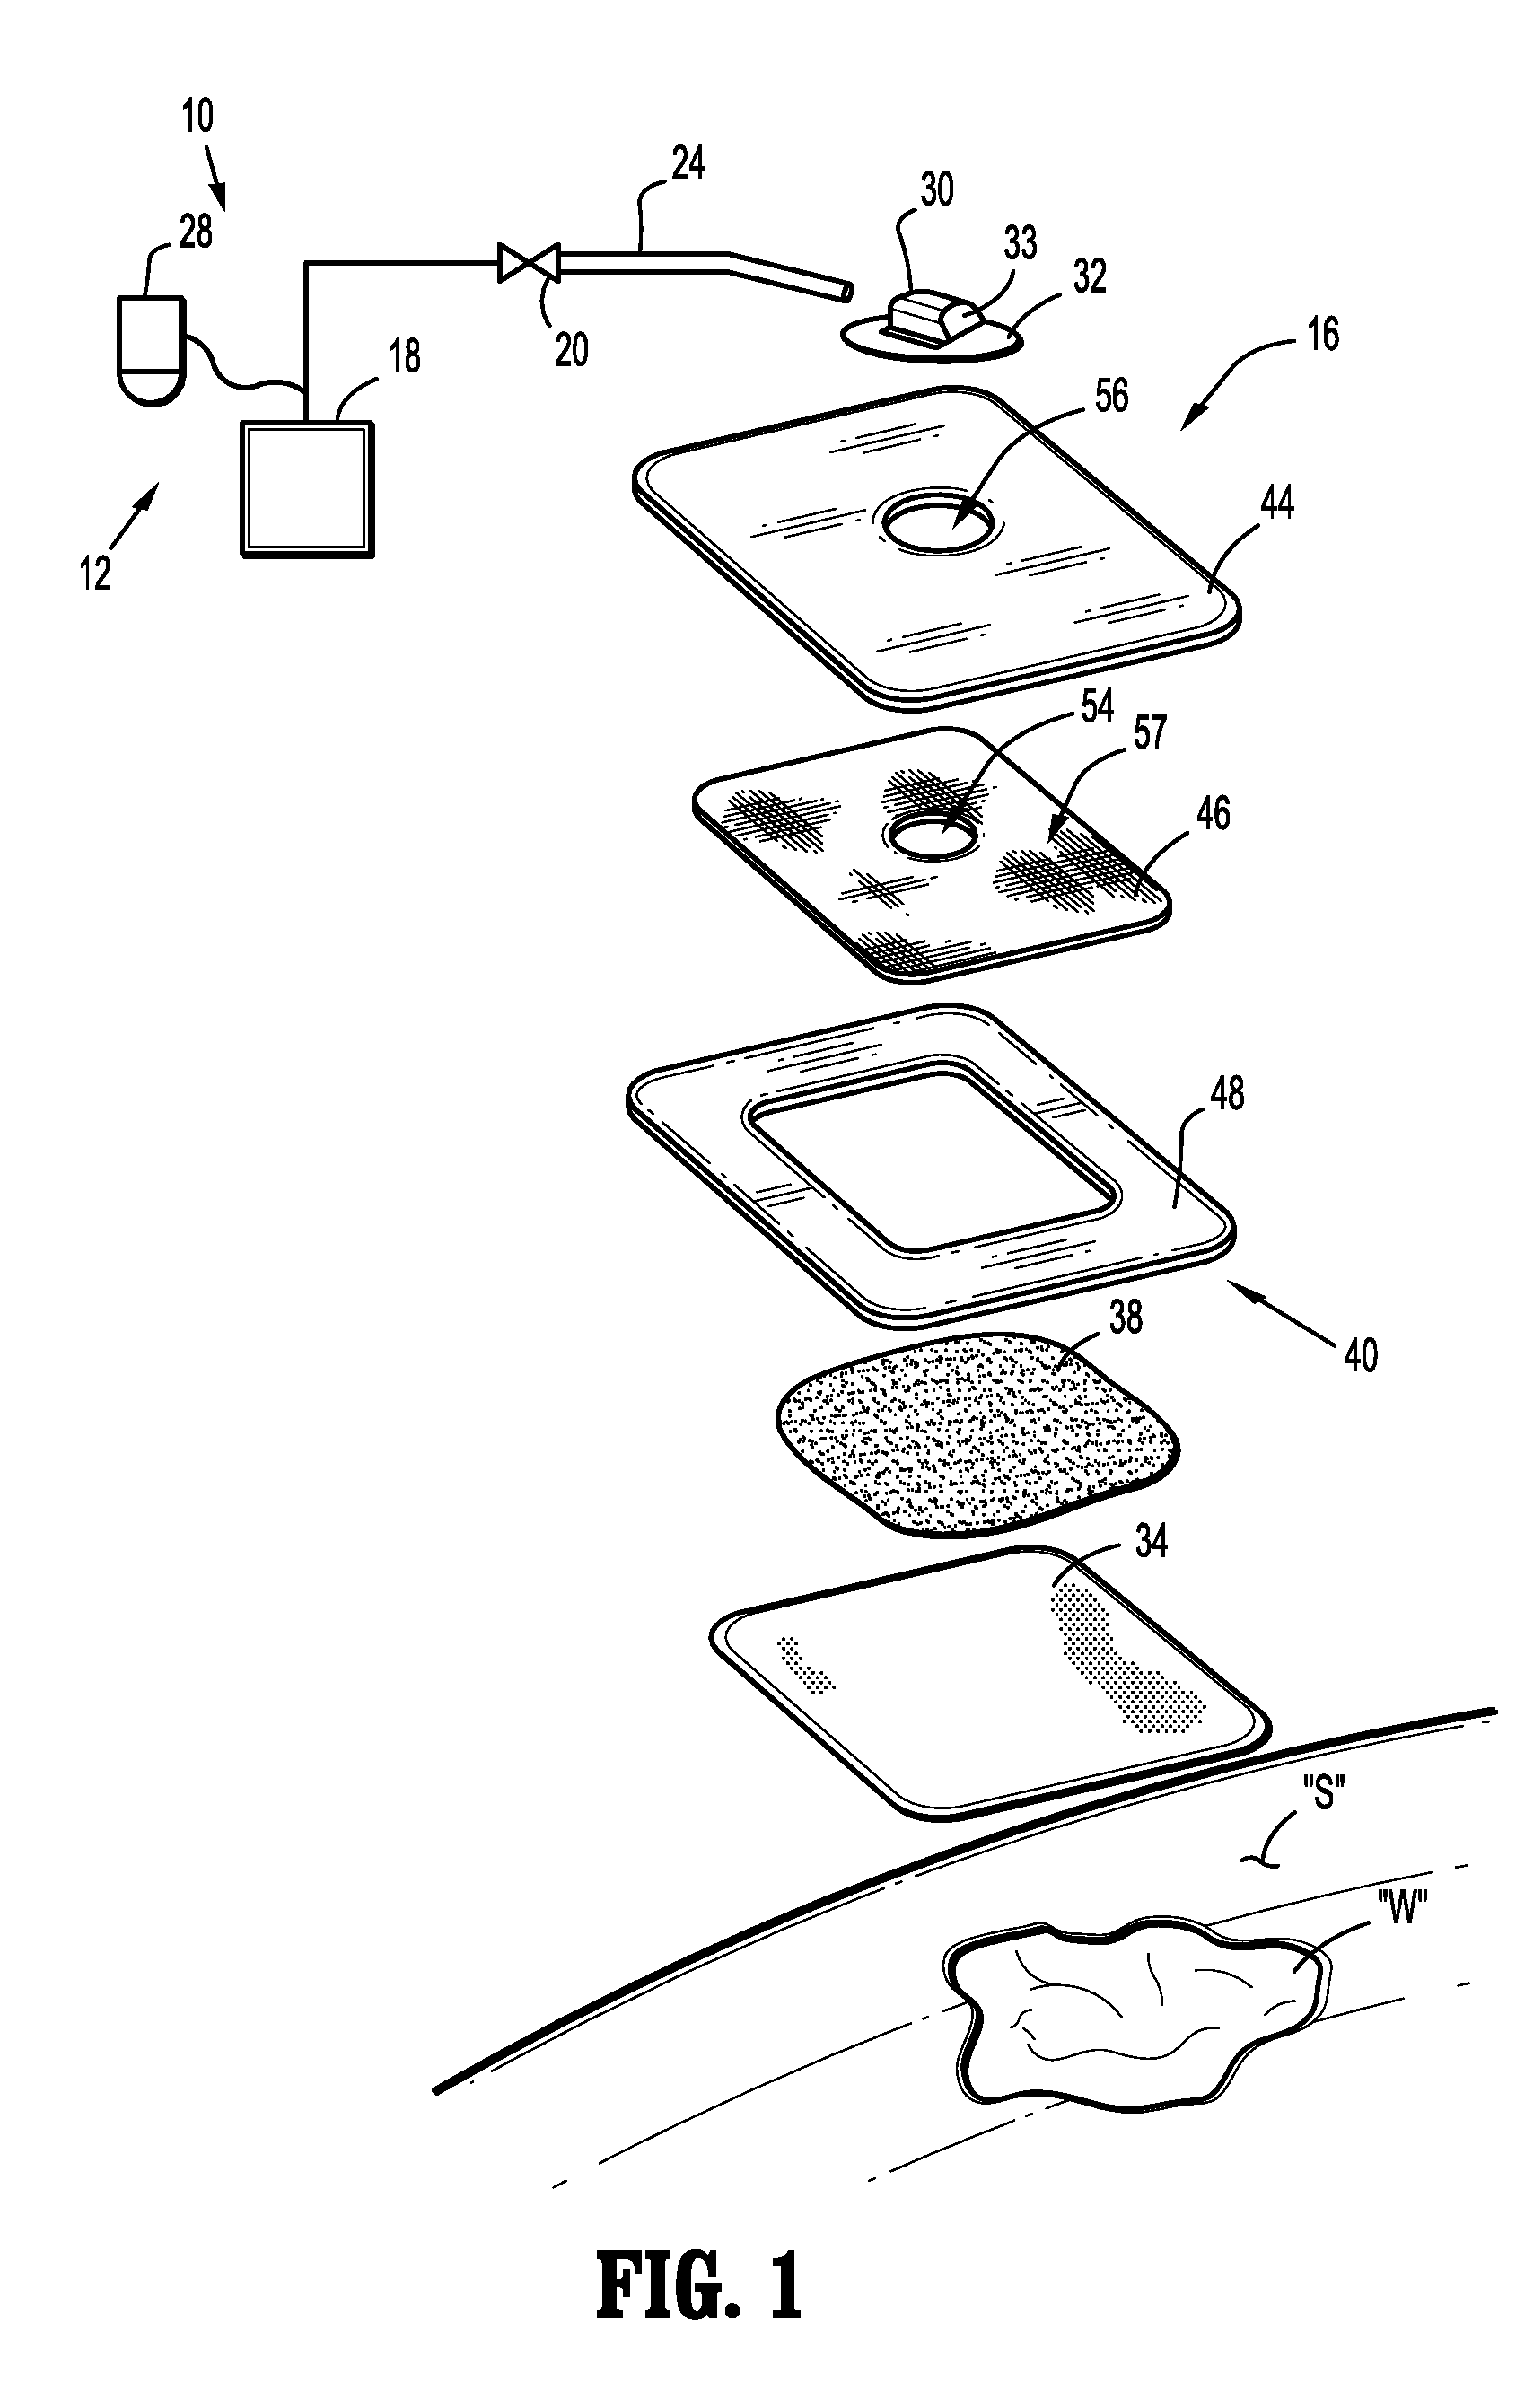 Shear Resistant Wound Dressing for Use in Vacuum Wound Therapy